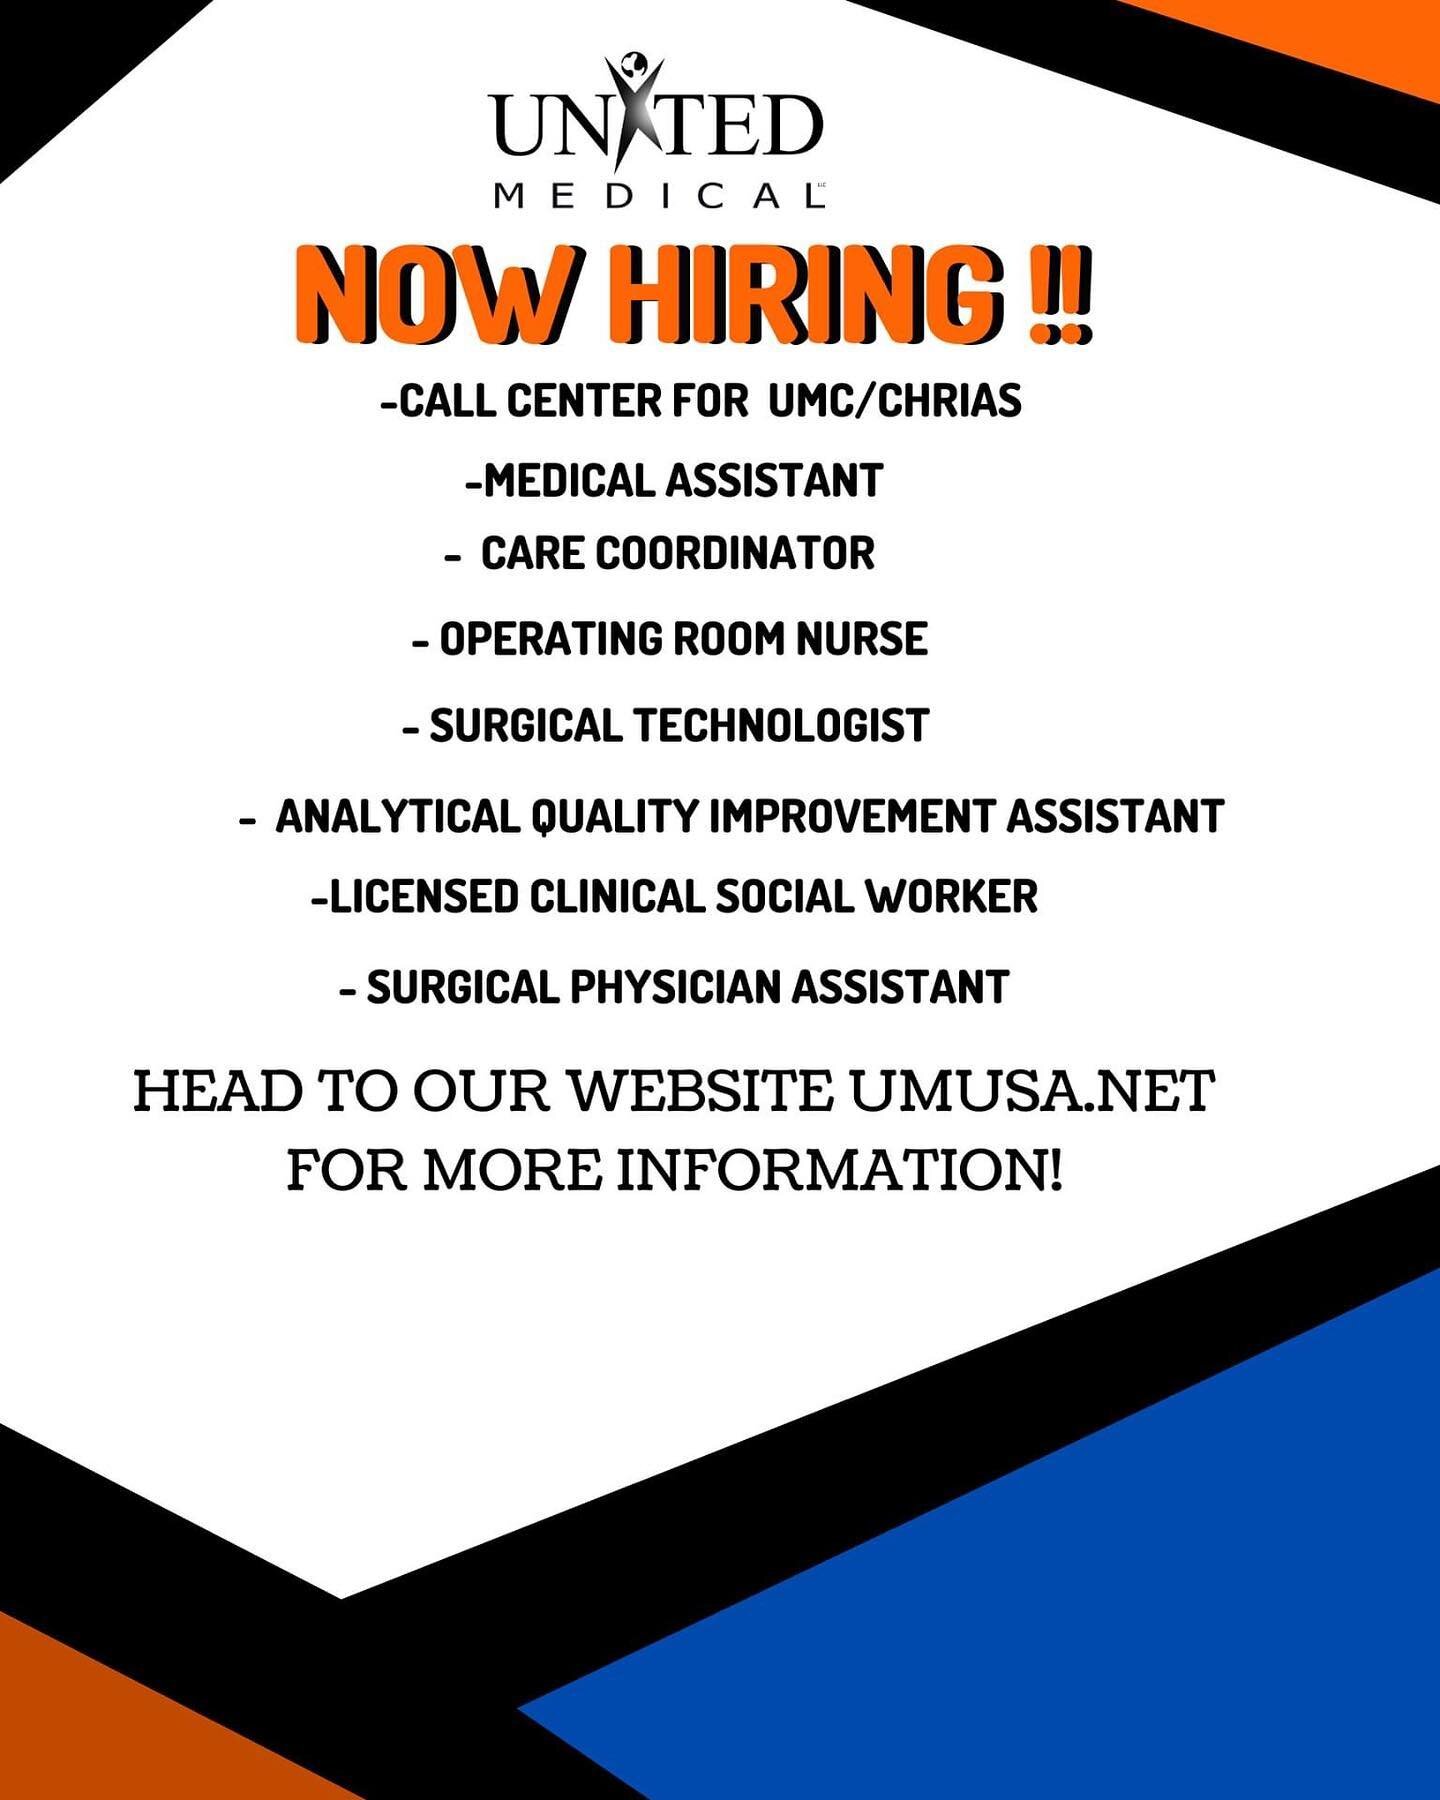 Join the United Medical Family now! Several positions now open, just apply on our website linked in our bio!
Share with family and friends who may be interested! #LINKINBIO